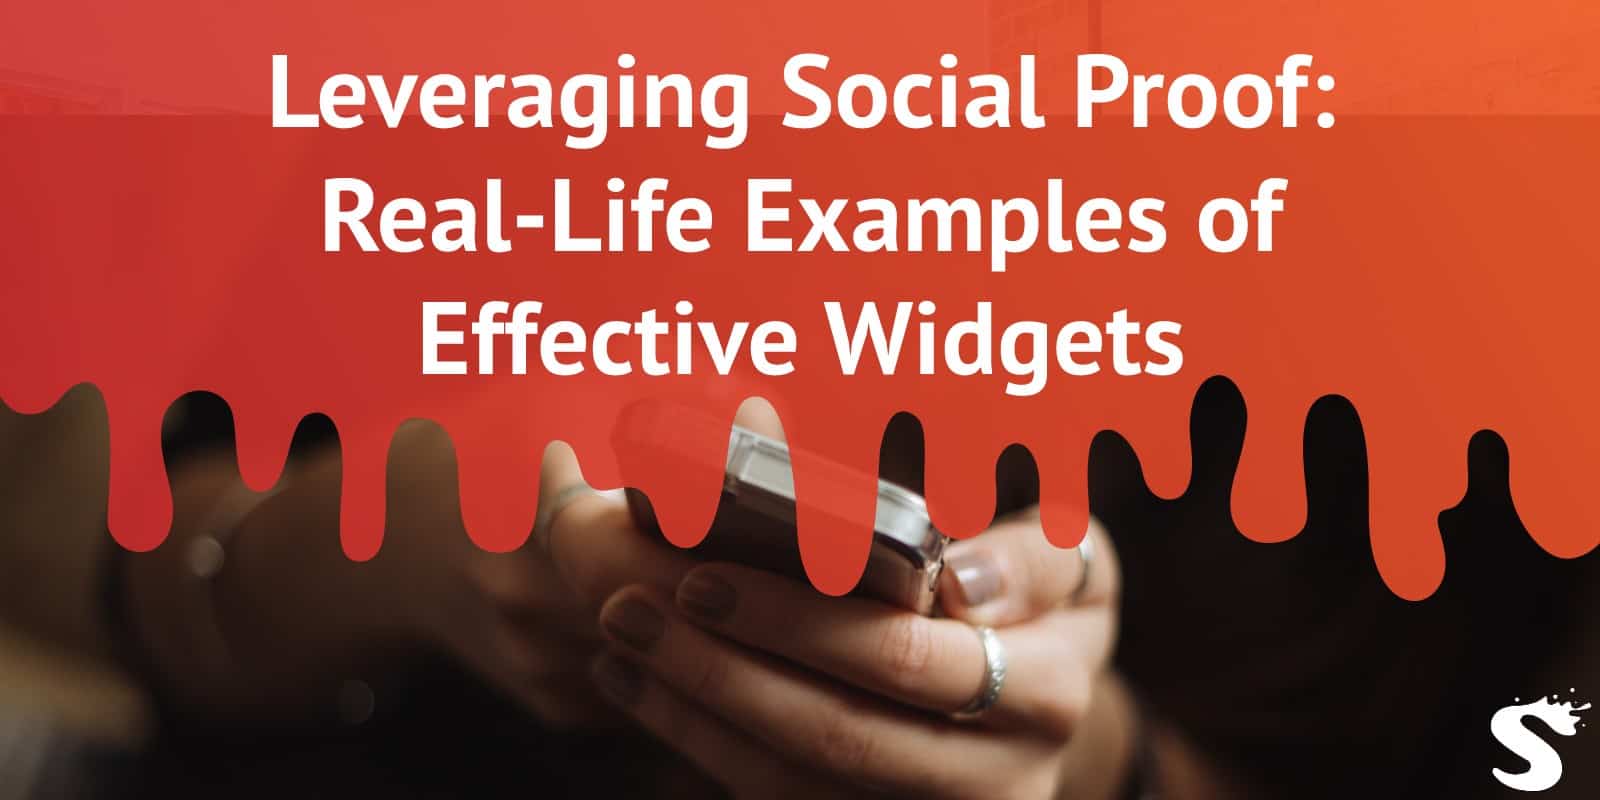 Leveraging Social Proof: Real-Life Examples of Effective Widgets